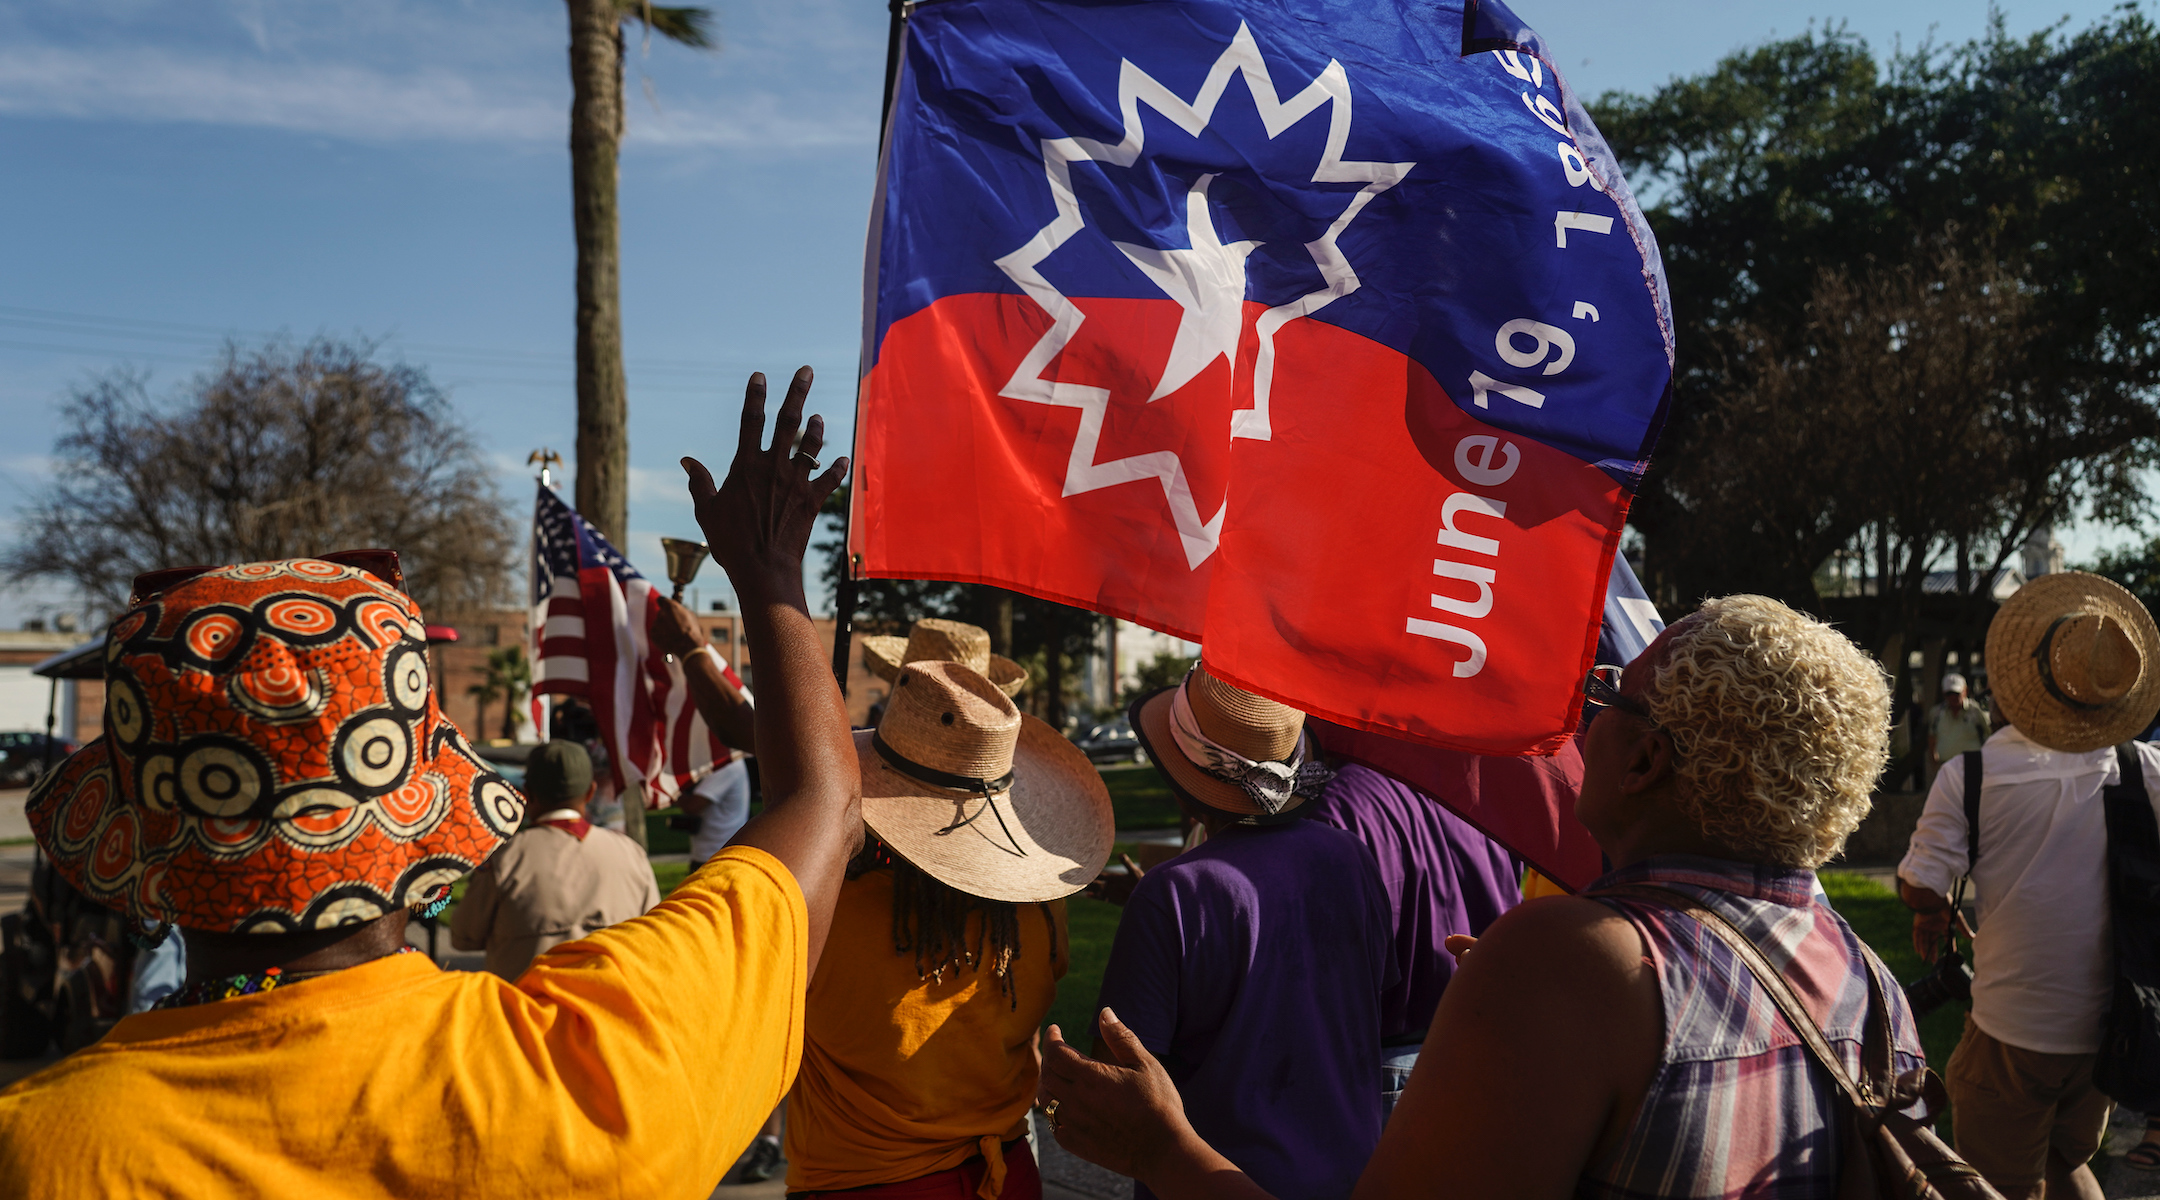 Galveston residents celebrate Juneteenth, which originated in the Texas city. (Getty)